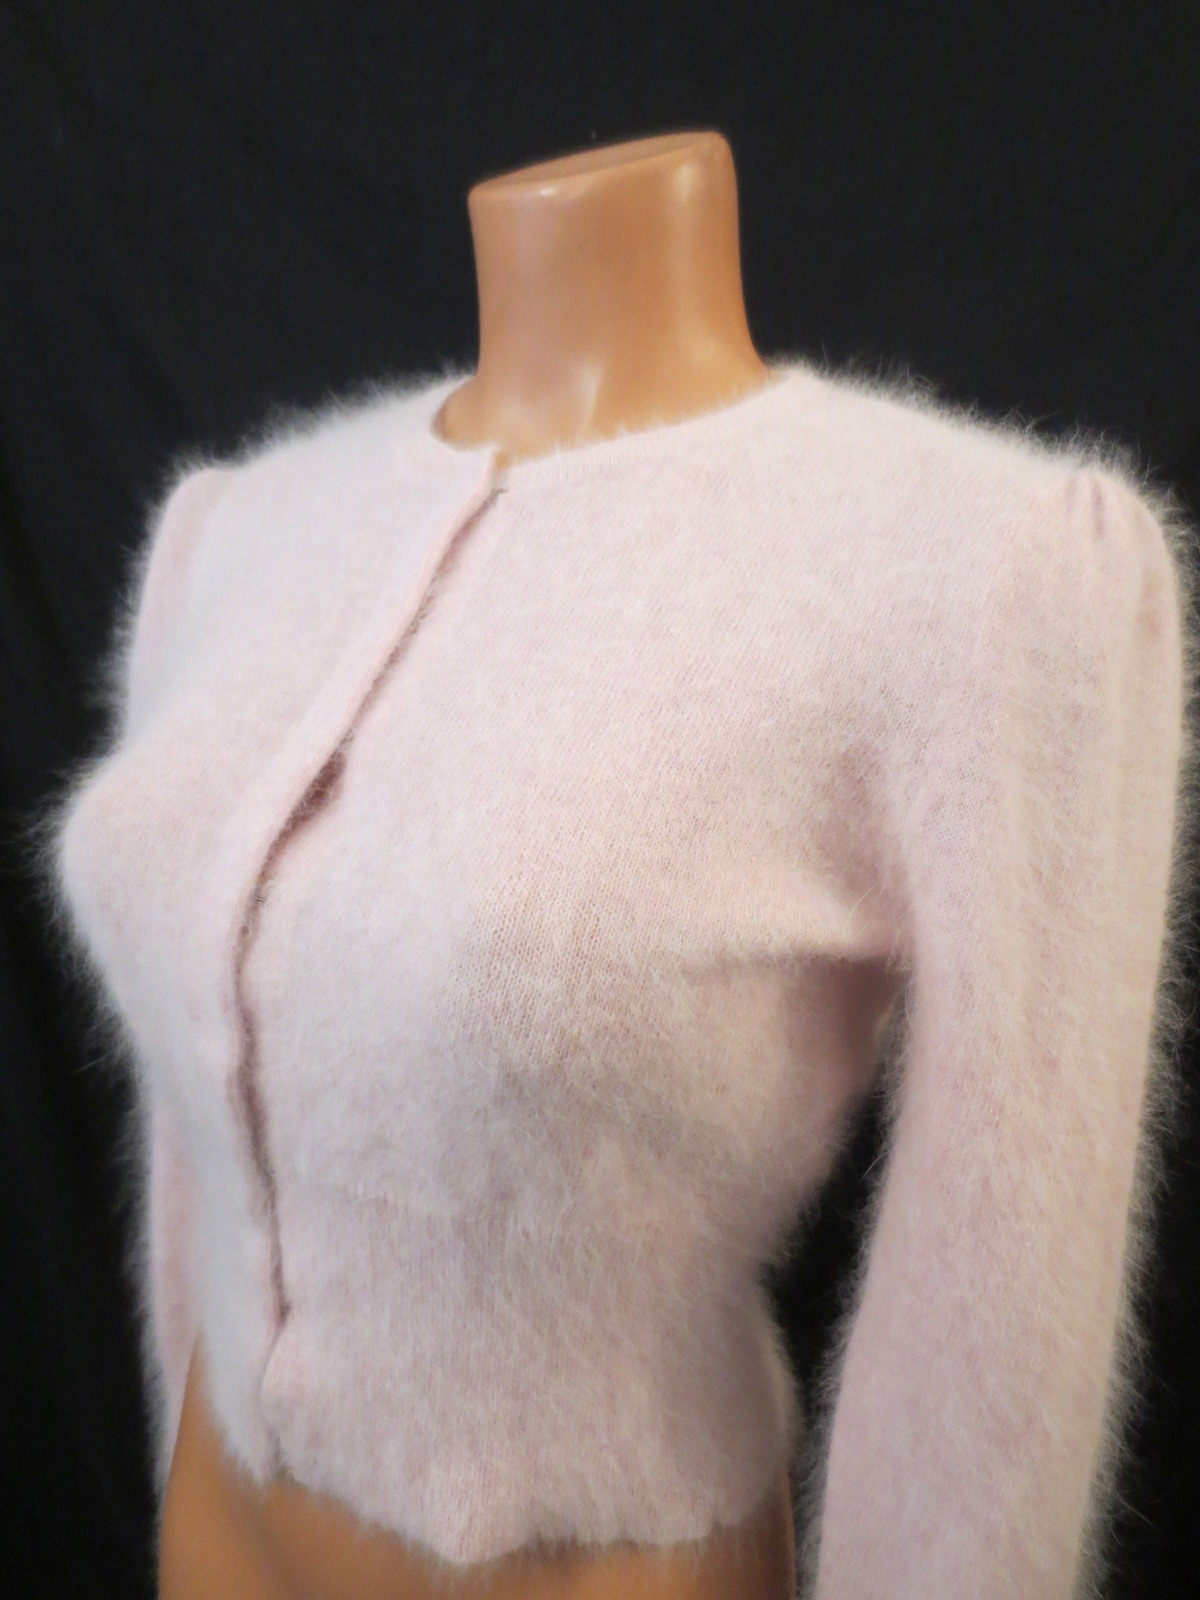 johnnybombshell:  Super-soft angora sweater in cotton-candy pink - Ed Wood’s favorite!!!